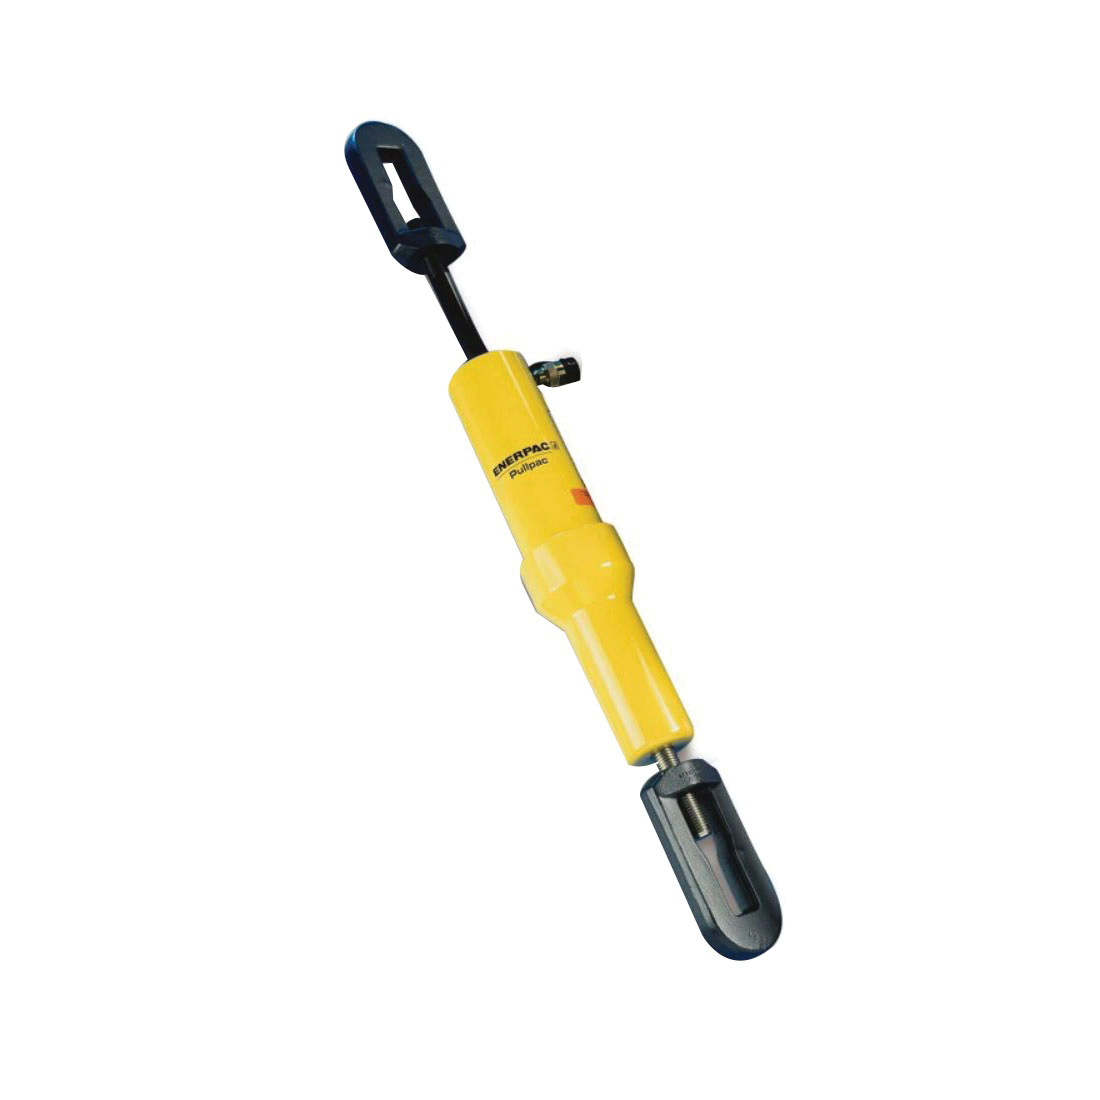 ENERPAC® Hydraulic Cylinder BRP306, Single Acting Cylinder, 35.95 ton Retract Cylinder, 6.1 in Stroke, Steel